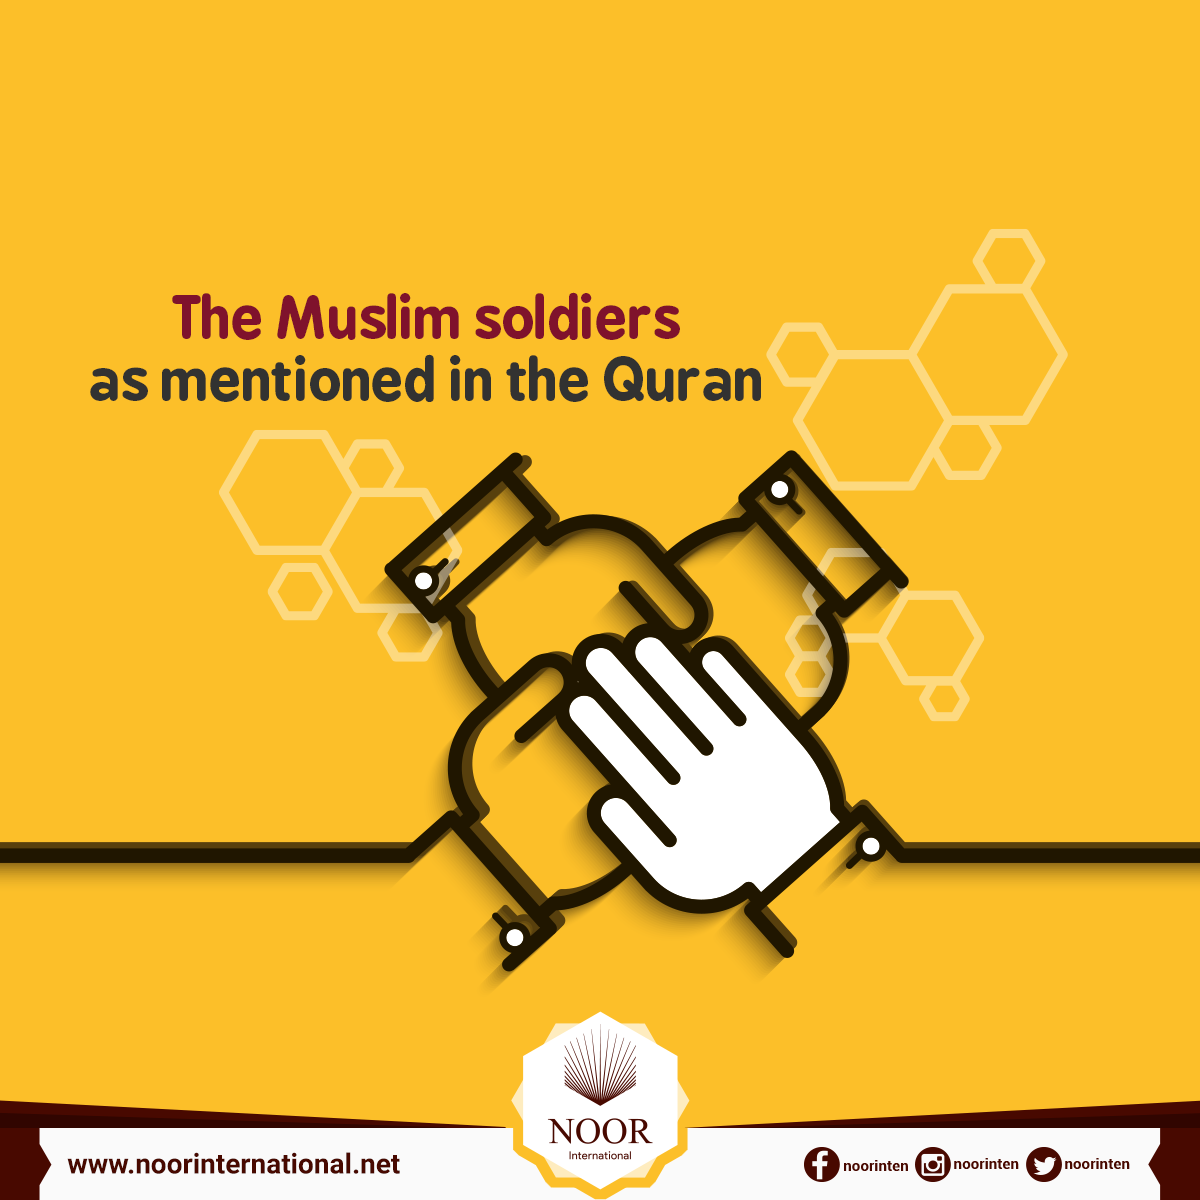 The Muslim soldiers as mentioned in the Quran